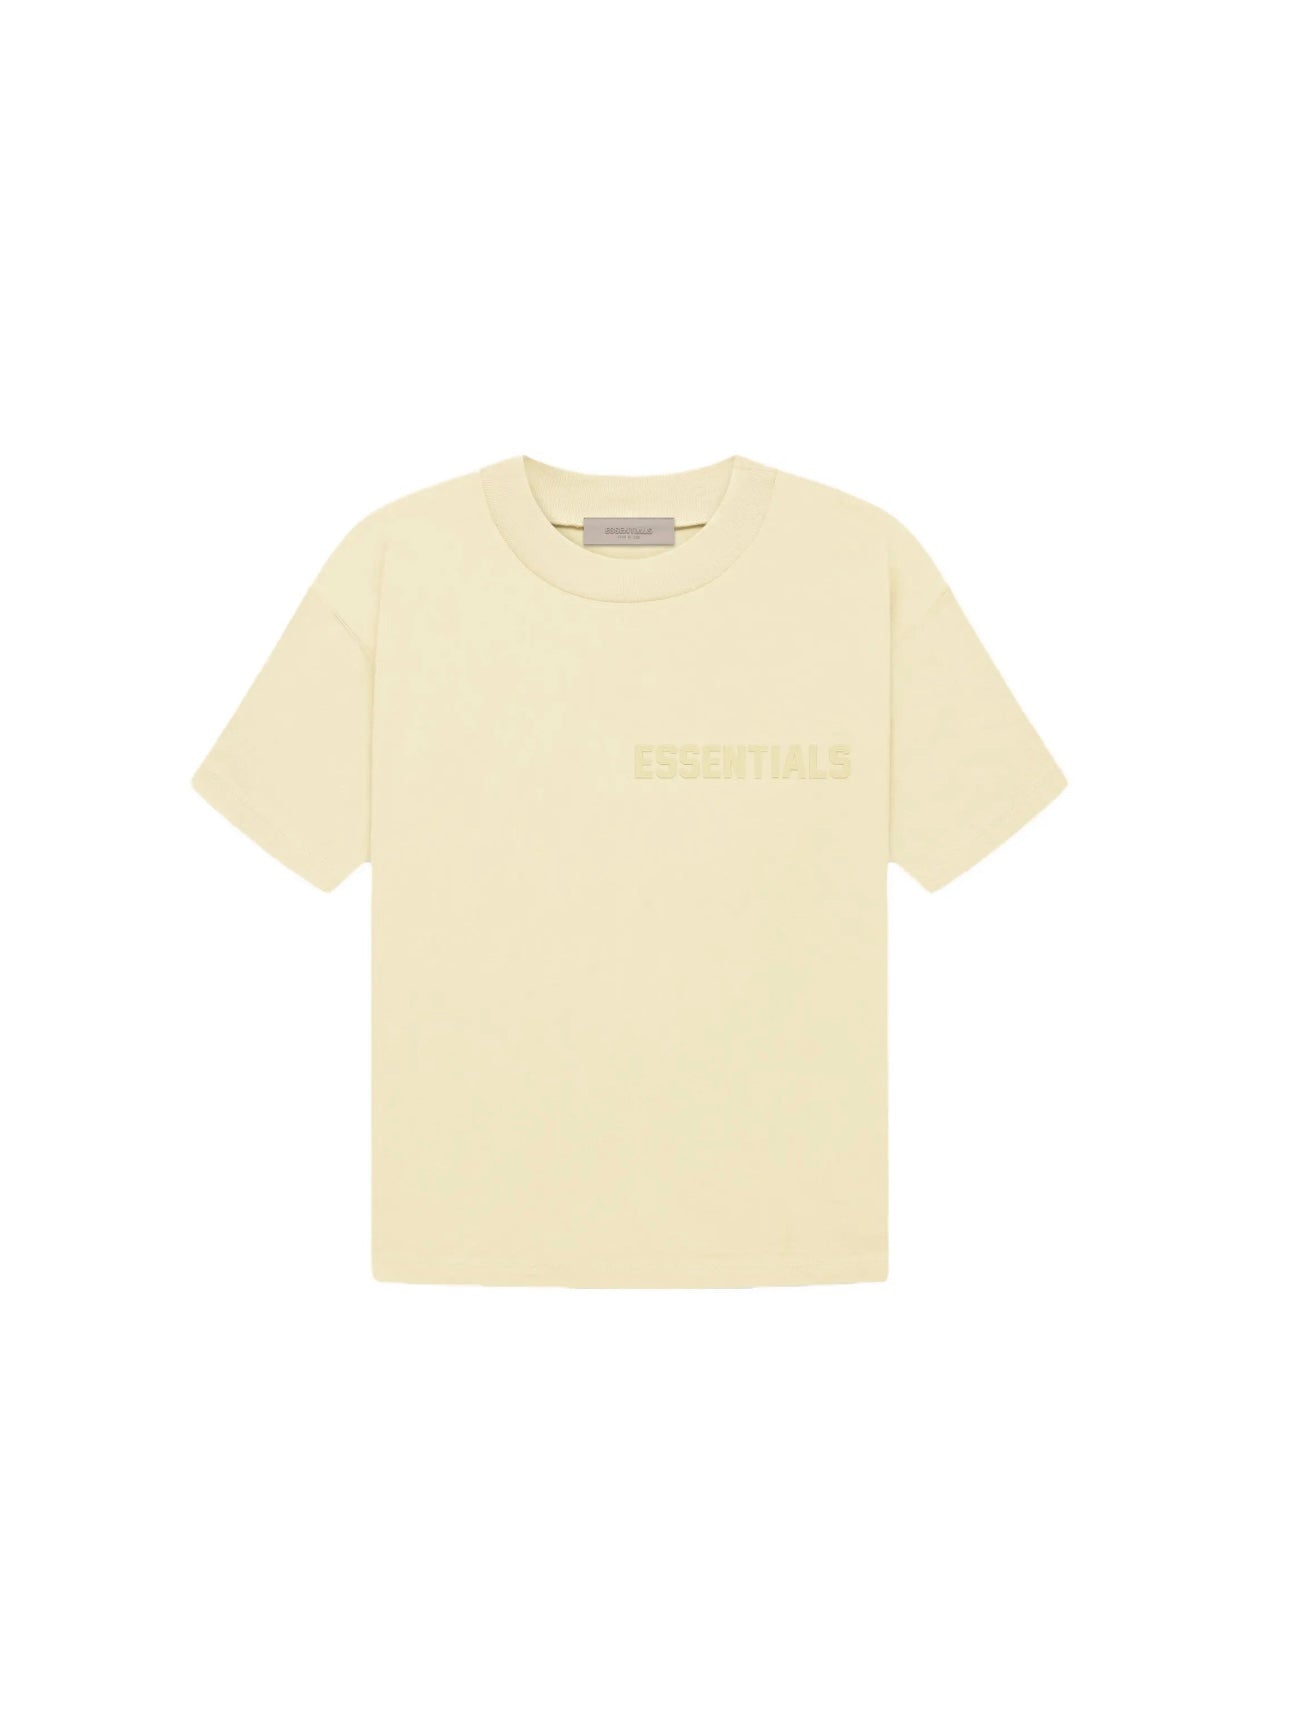 Essentials Tee “Canary”